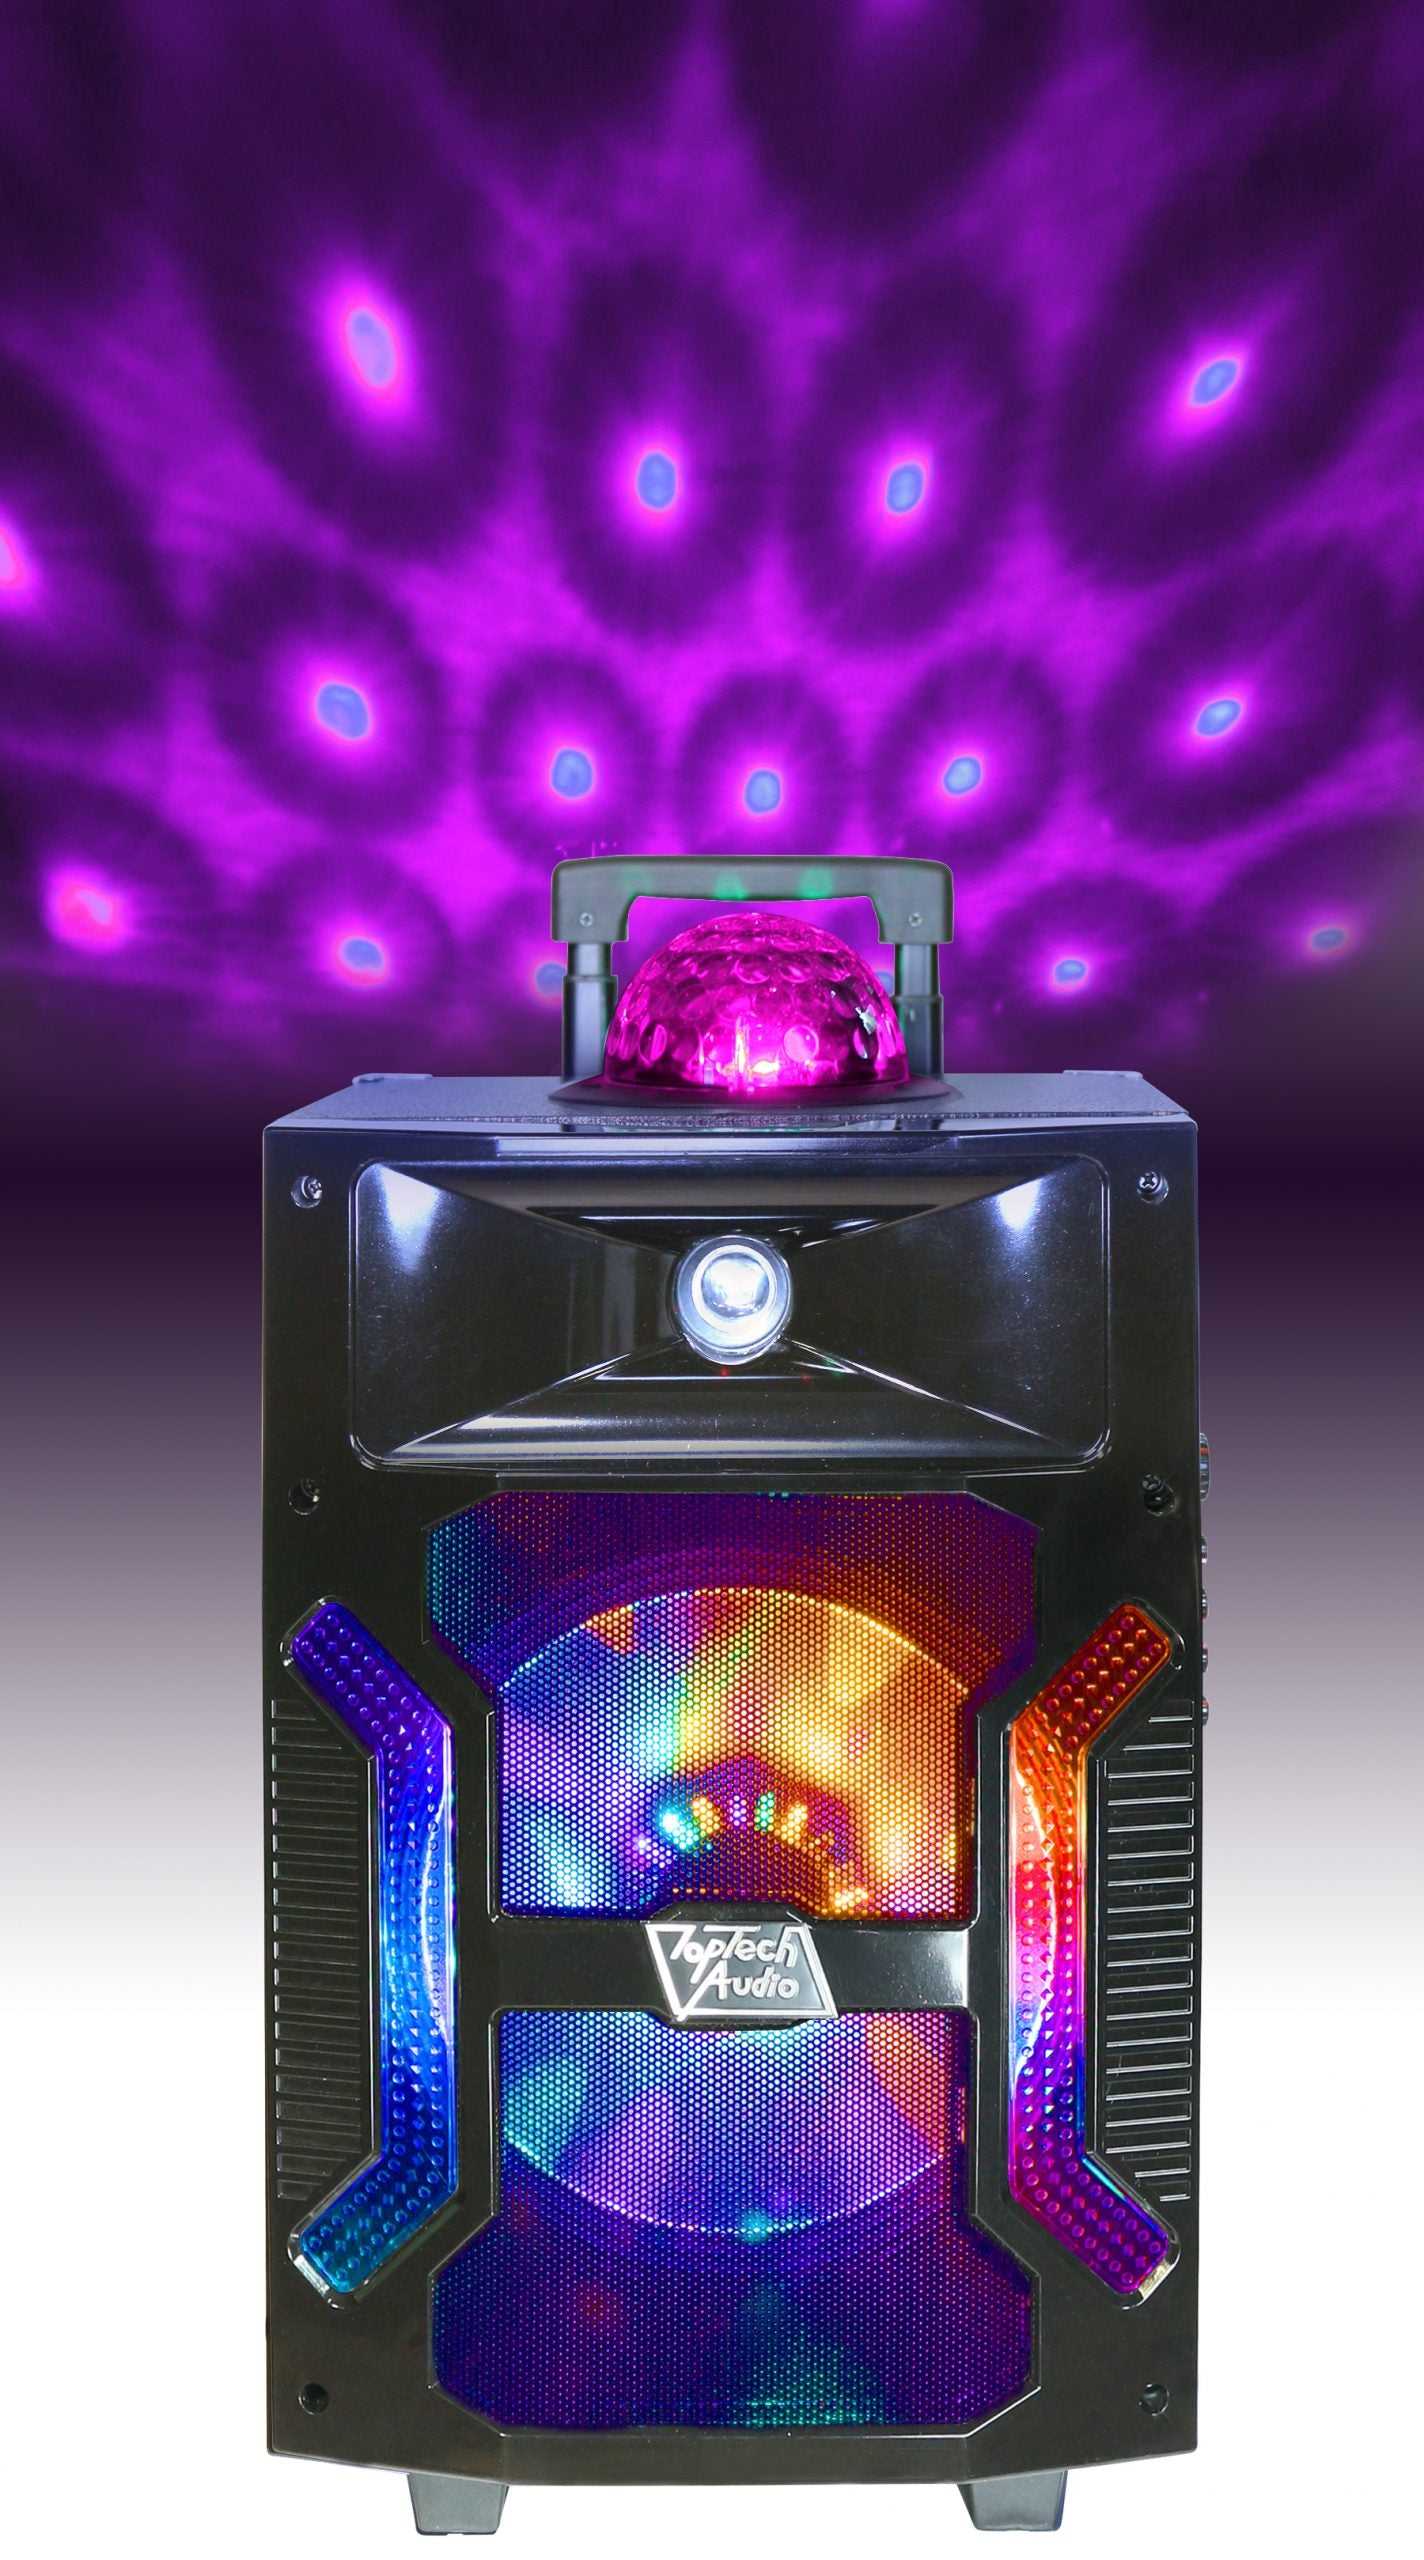 Fully Amplified Portable 2000 Watts Peak Power 10” Speaker with DISCO BALL